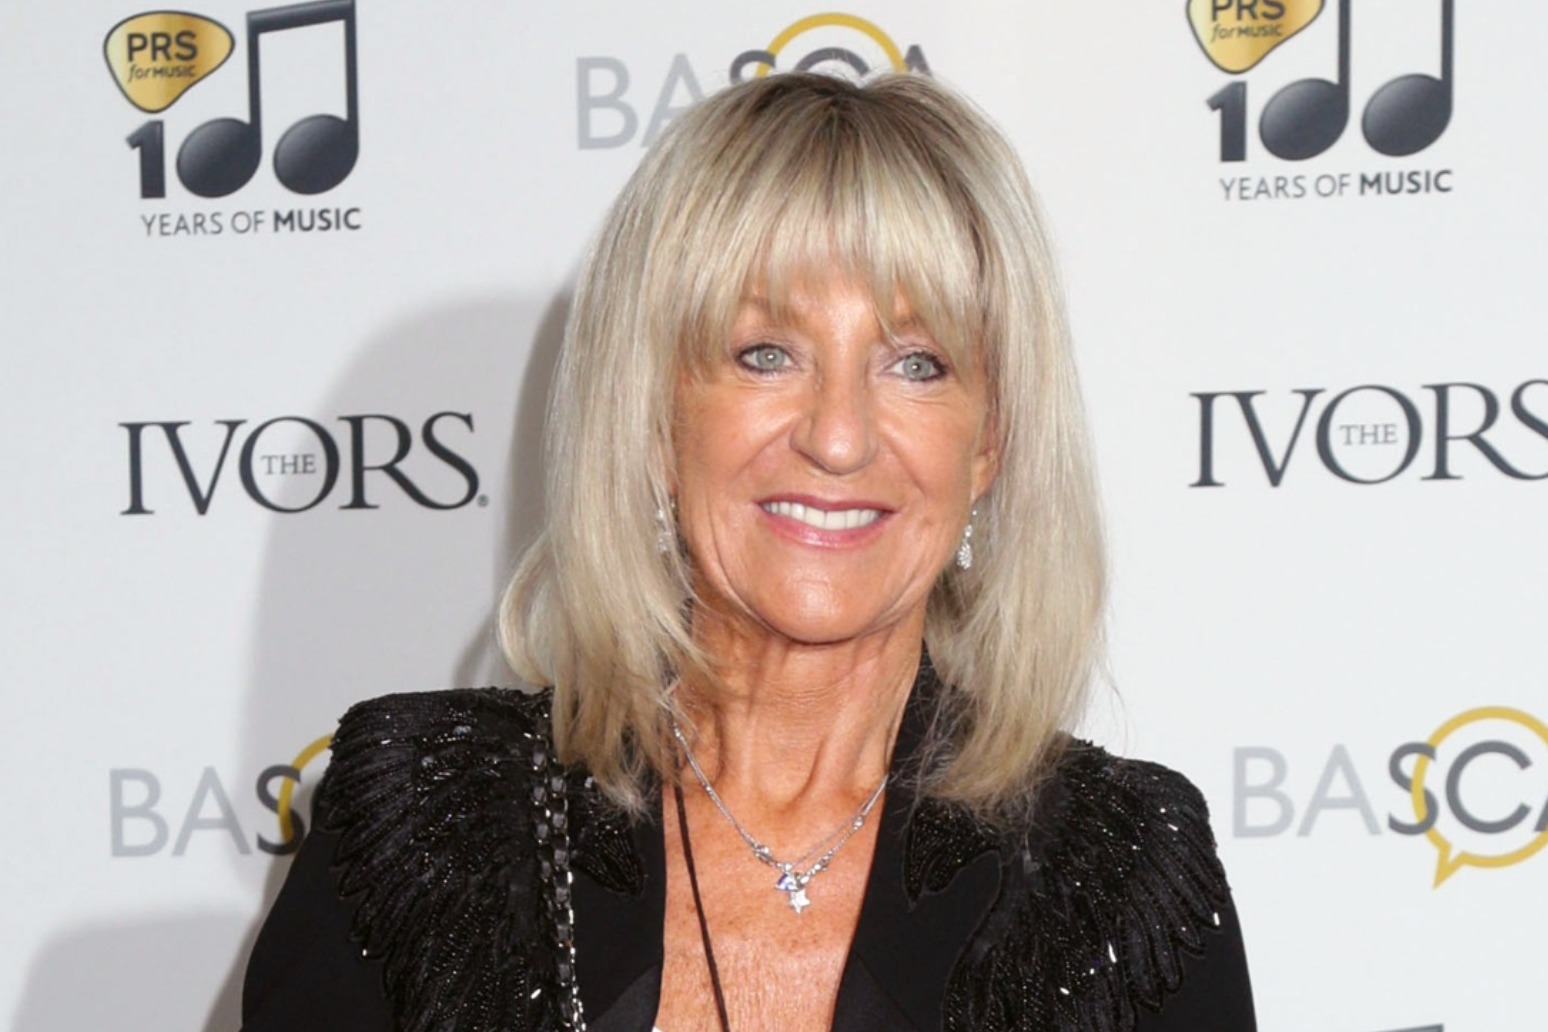 Bill Clinton among famous faces remembering ‘rock n roll icon’ Christine McVie 